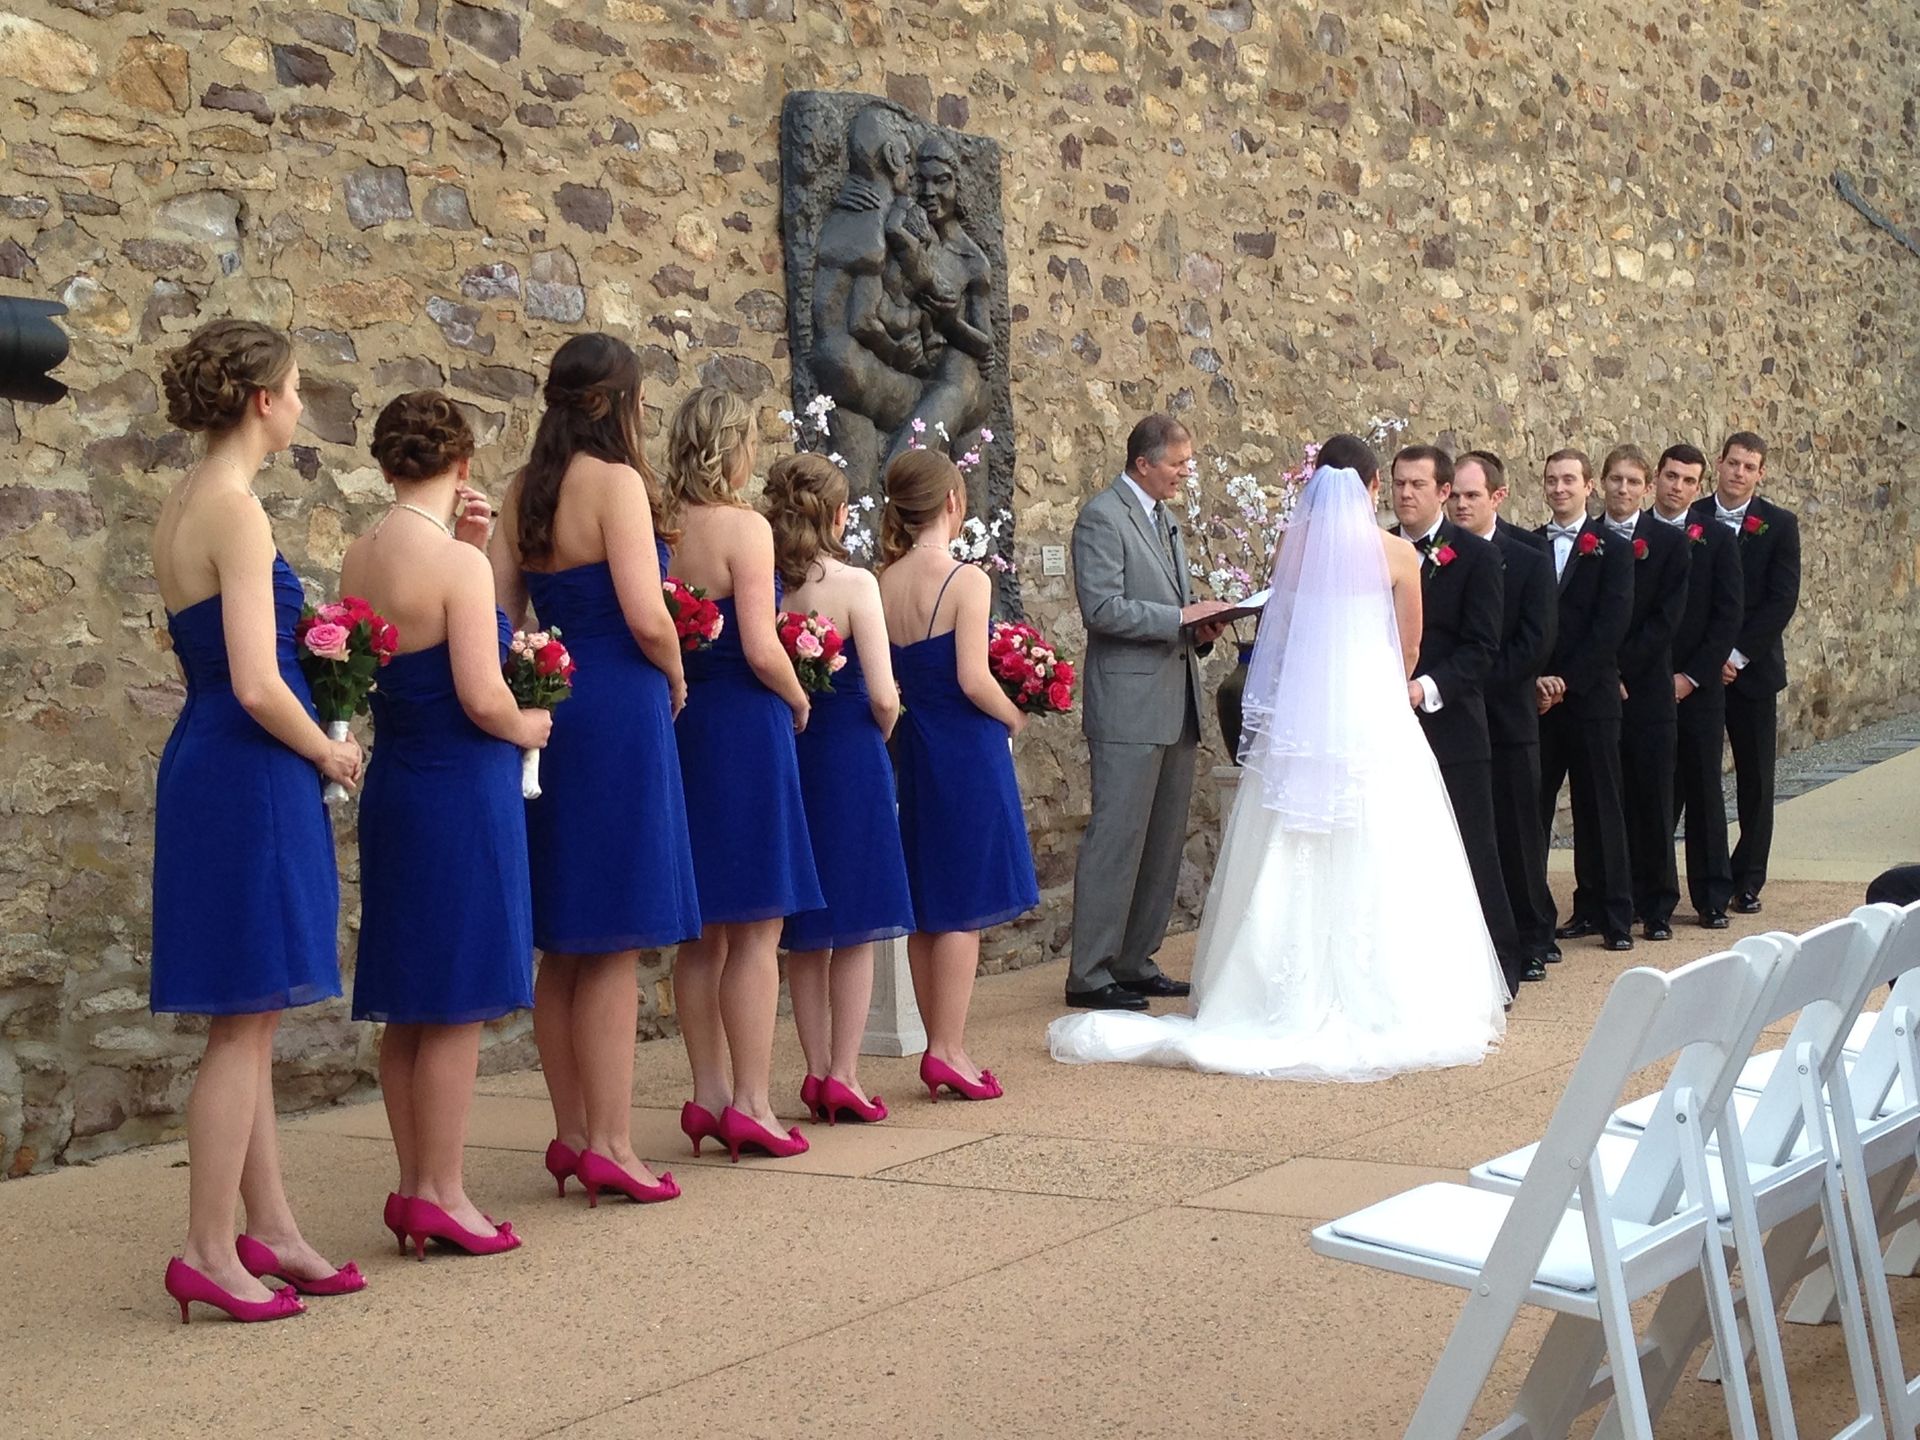 outdoor wedding ceremony with bridesmaids wearing blue dresses